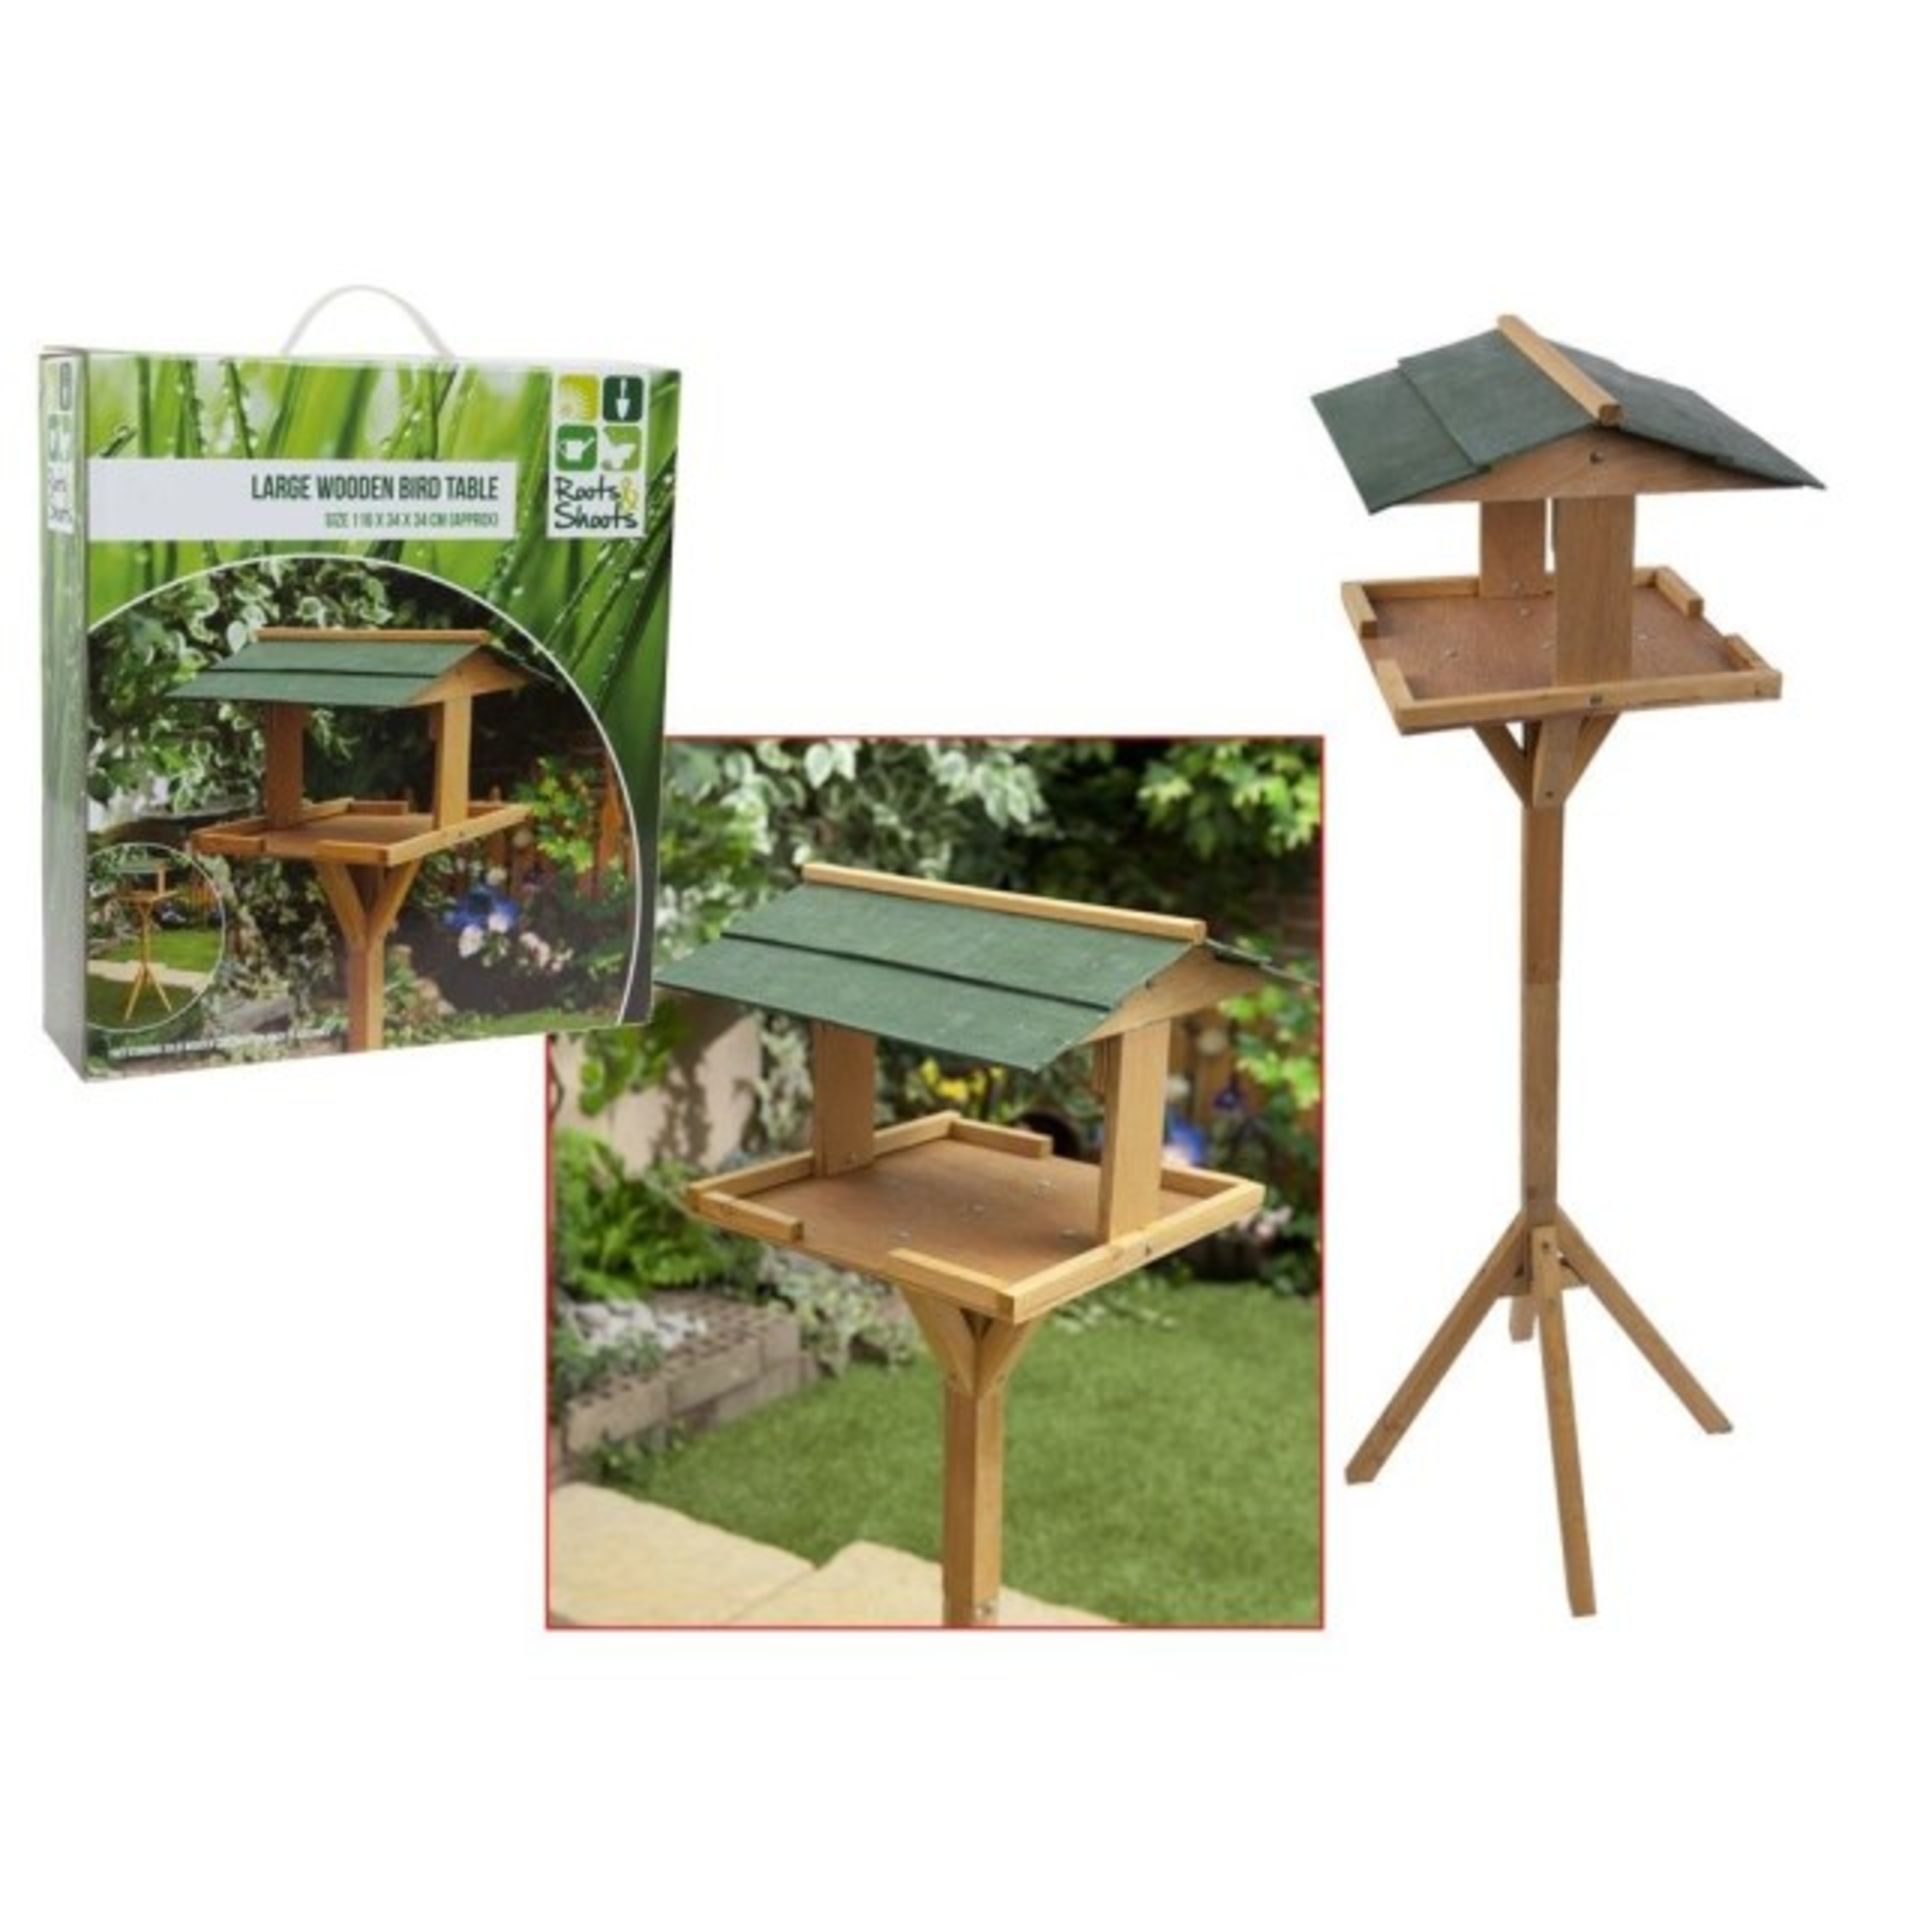 V Brand New Large Wooden Bird Table (116 x 34 x 34 cm Approx) X 5 Bid price to be multiplied by